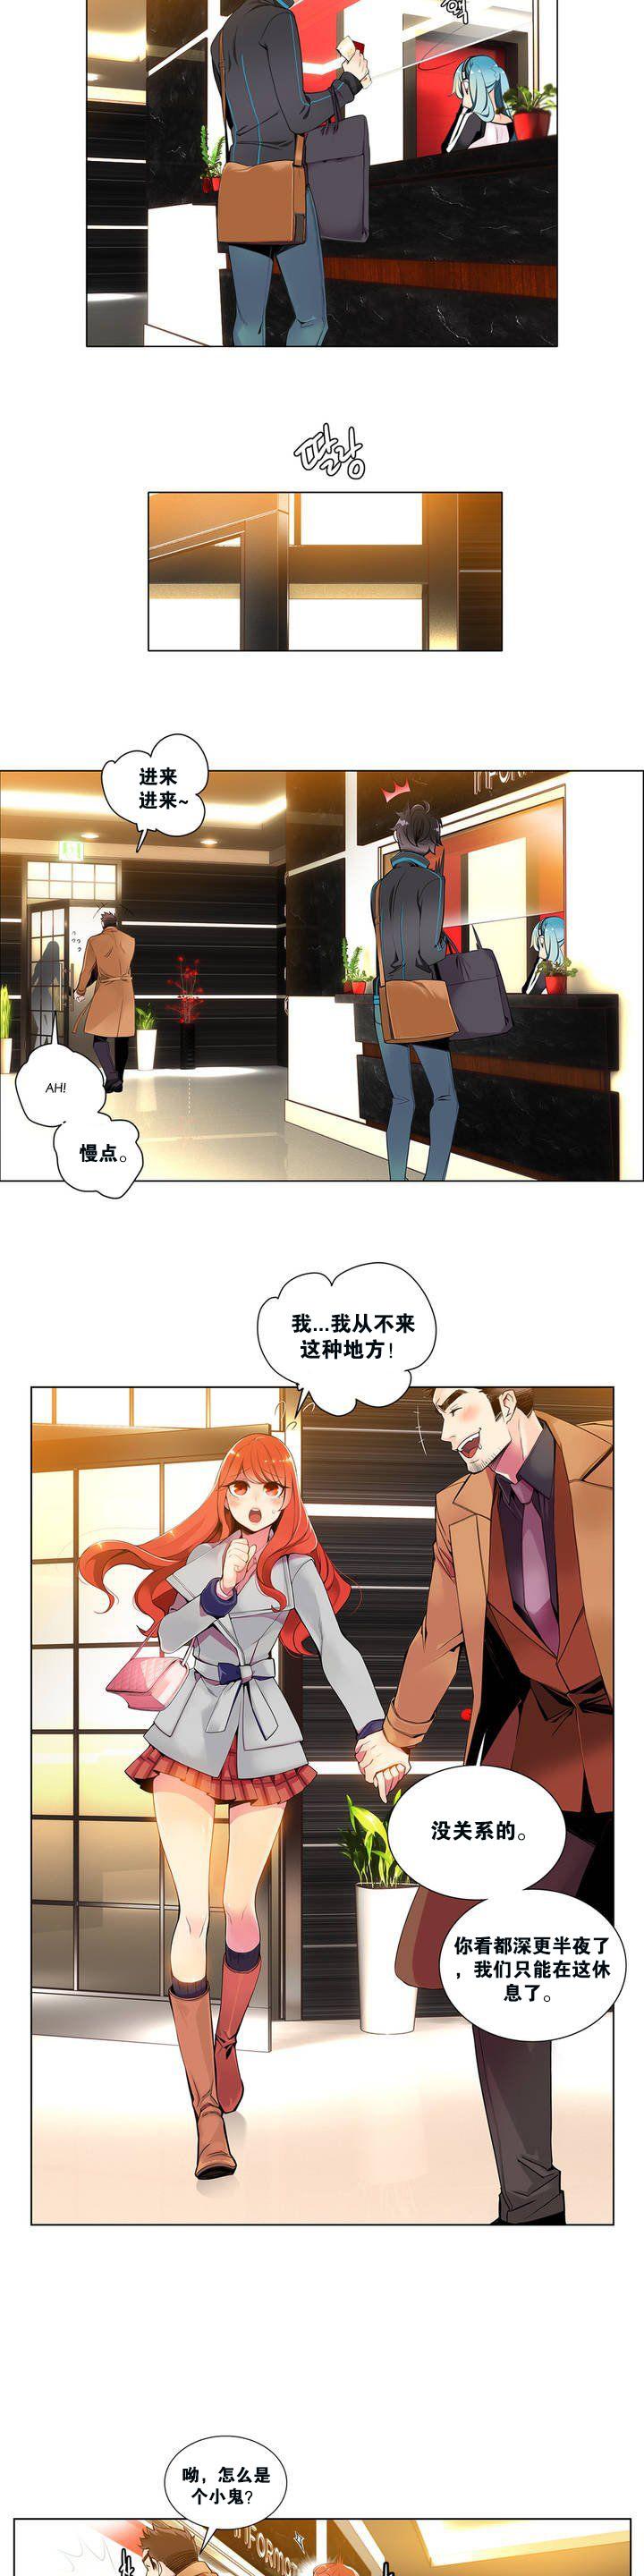 Groupfuck [Juder] 莉莉丝的纽带(Lilith`s Cord) Ch.1-15 [Chinese] Vip - Page 7